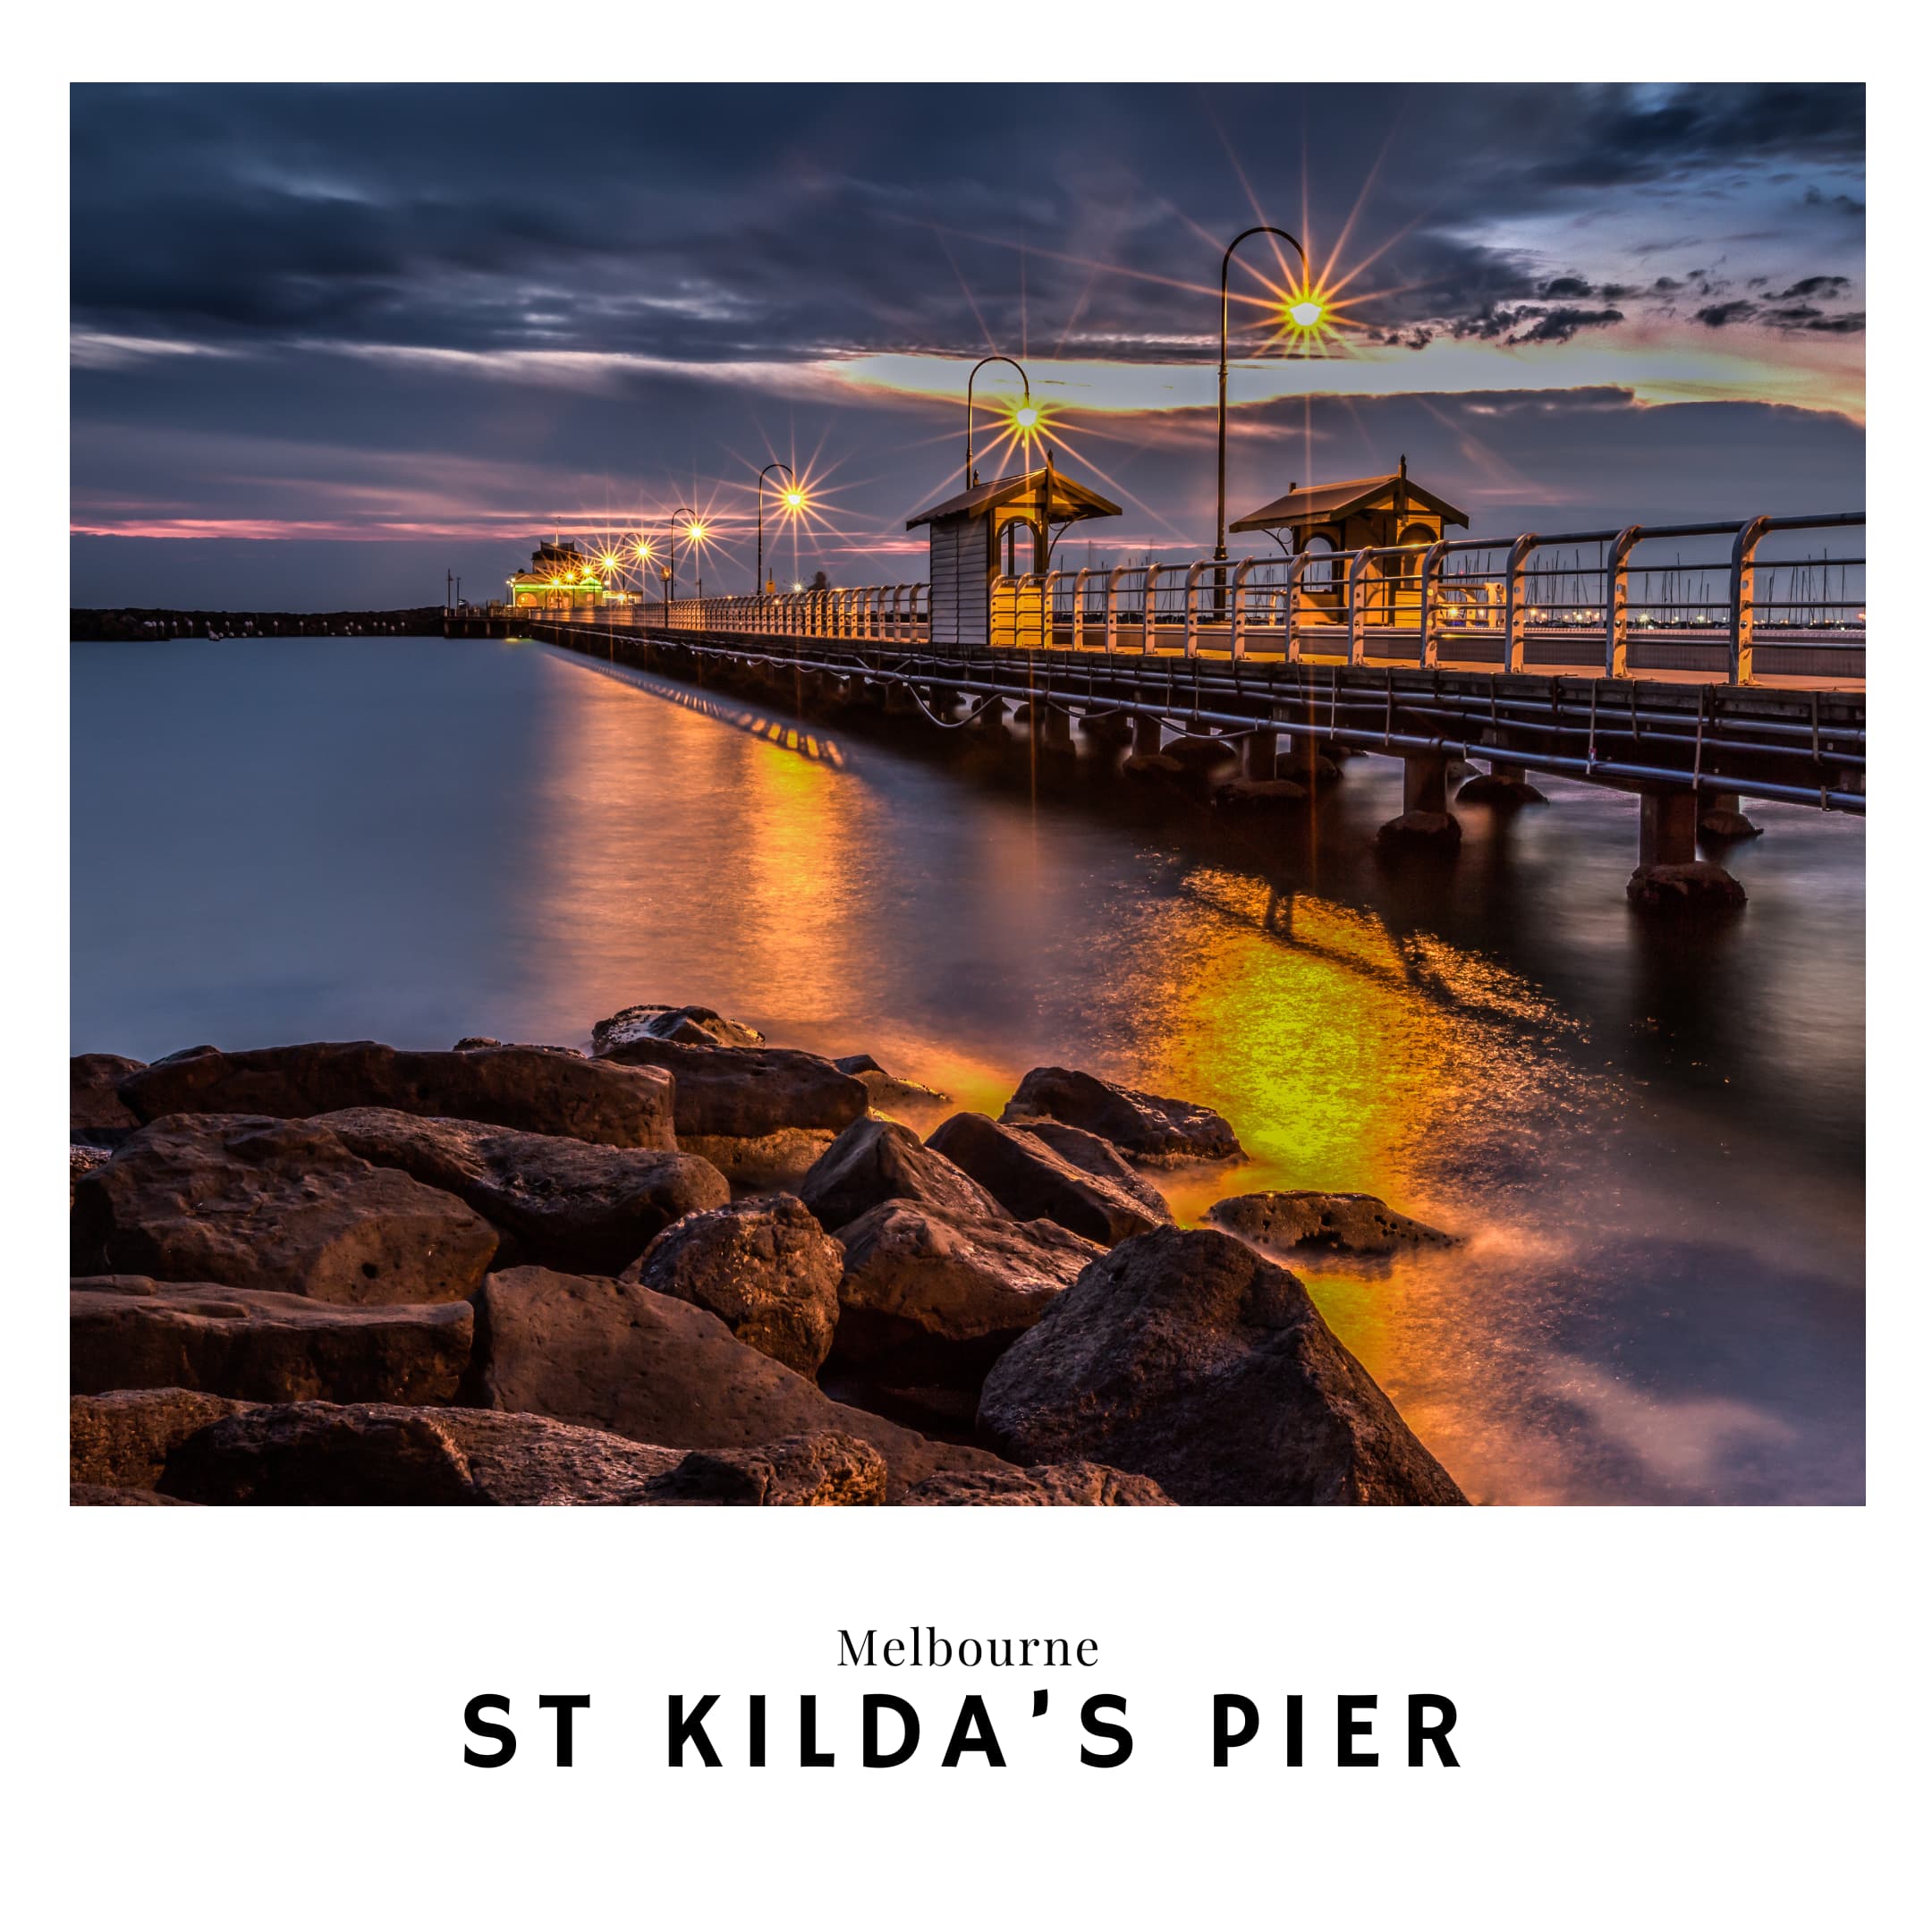 Link to the St Kilda Travel Guide